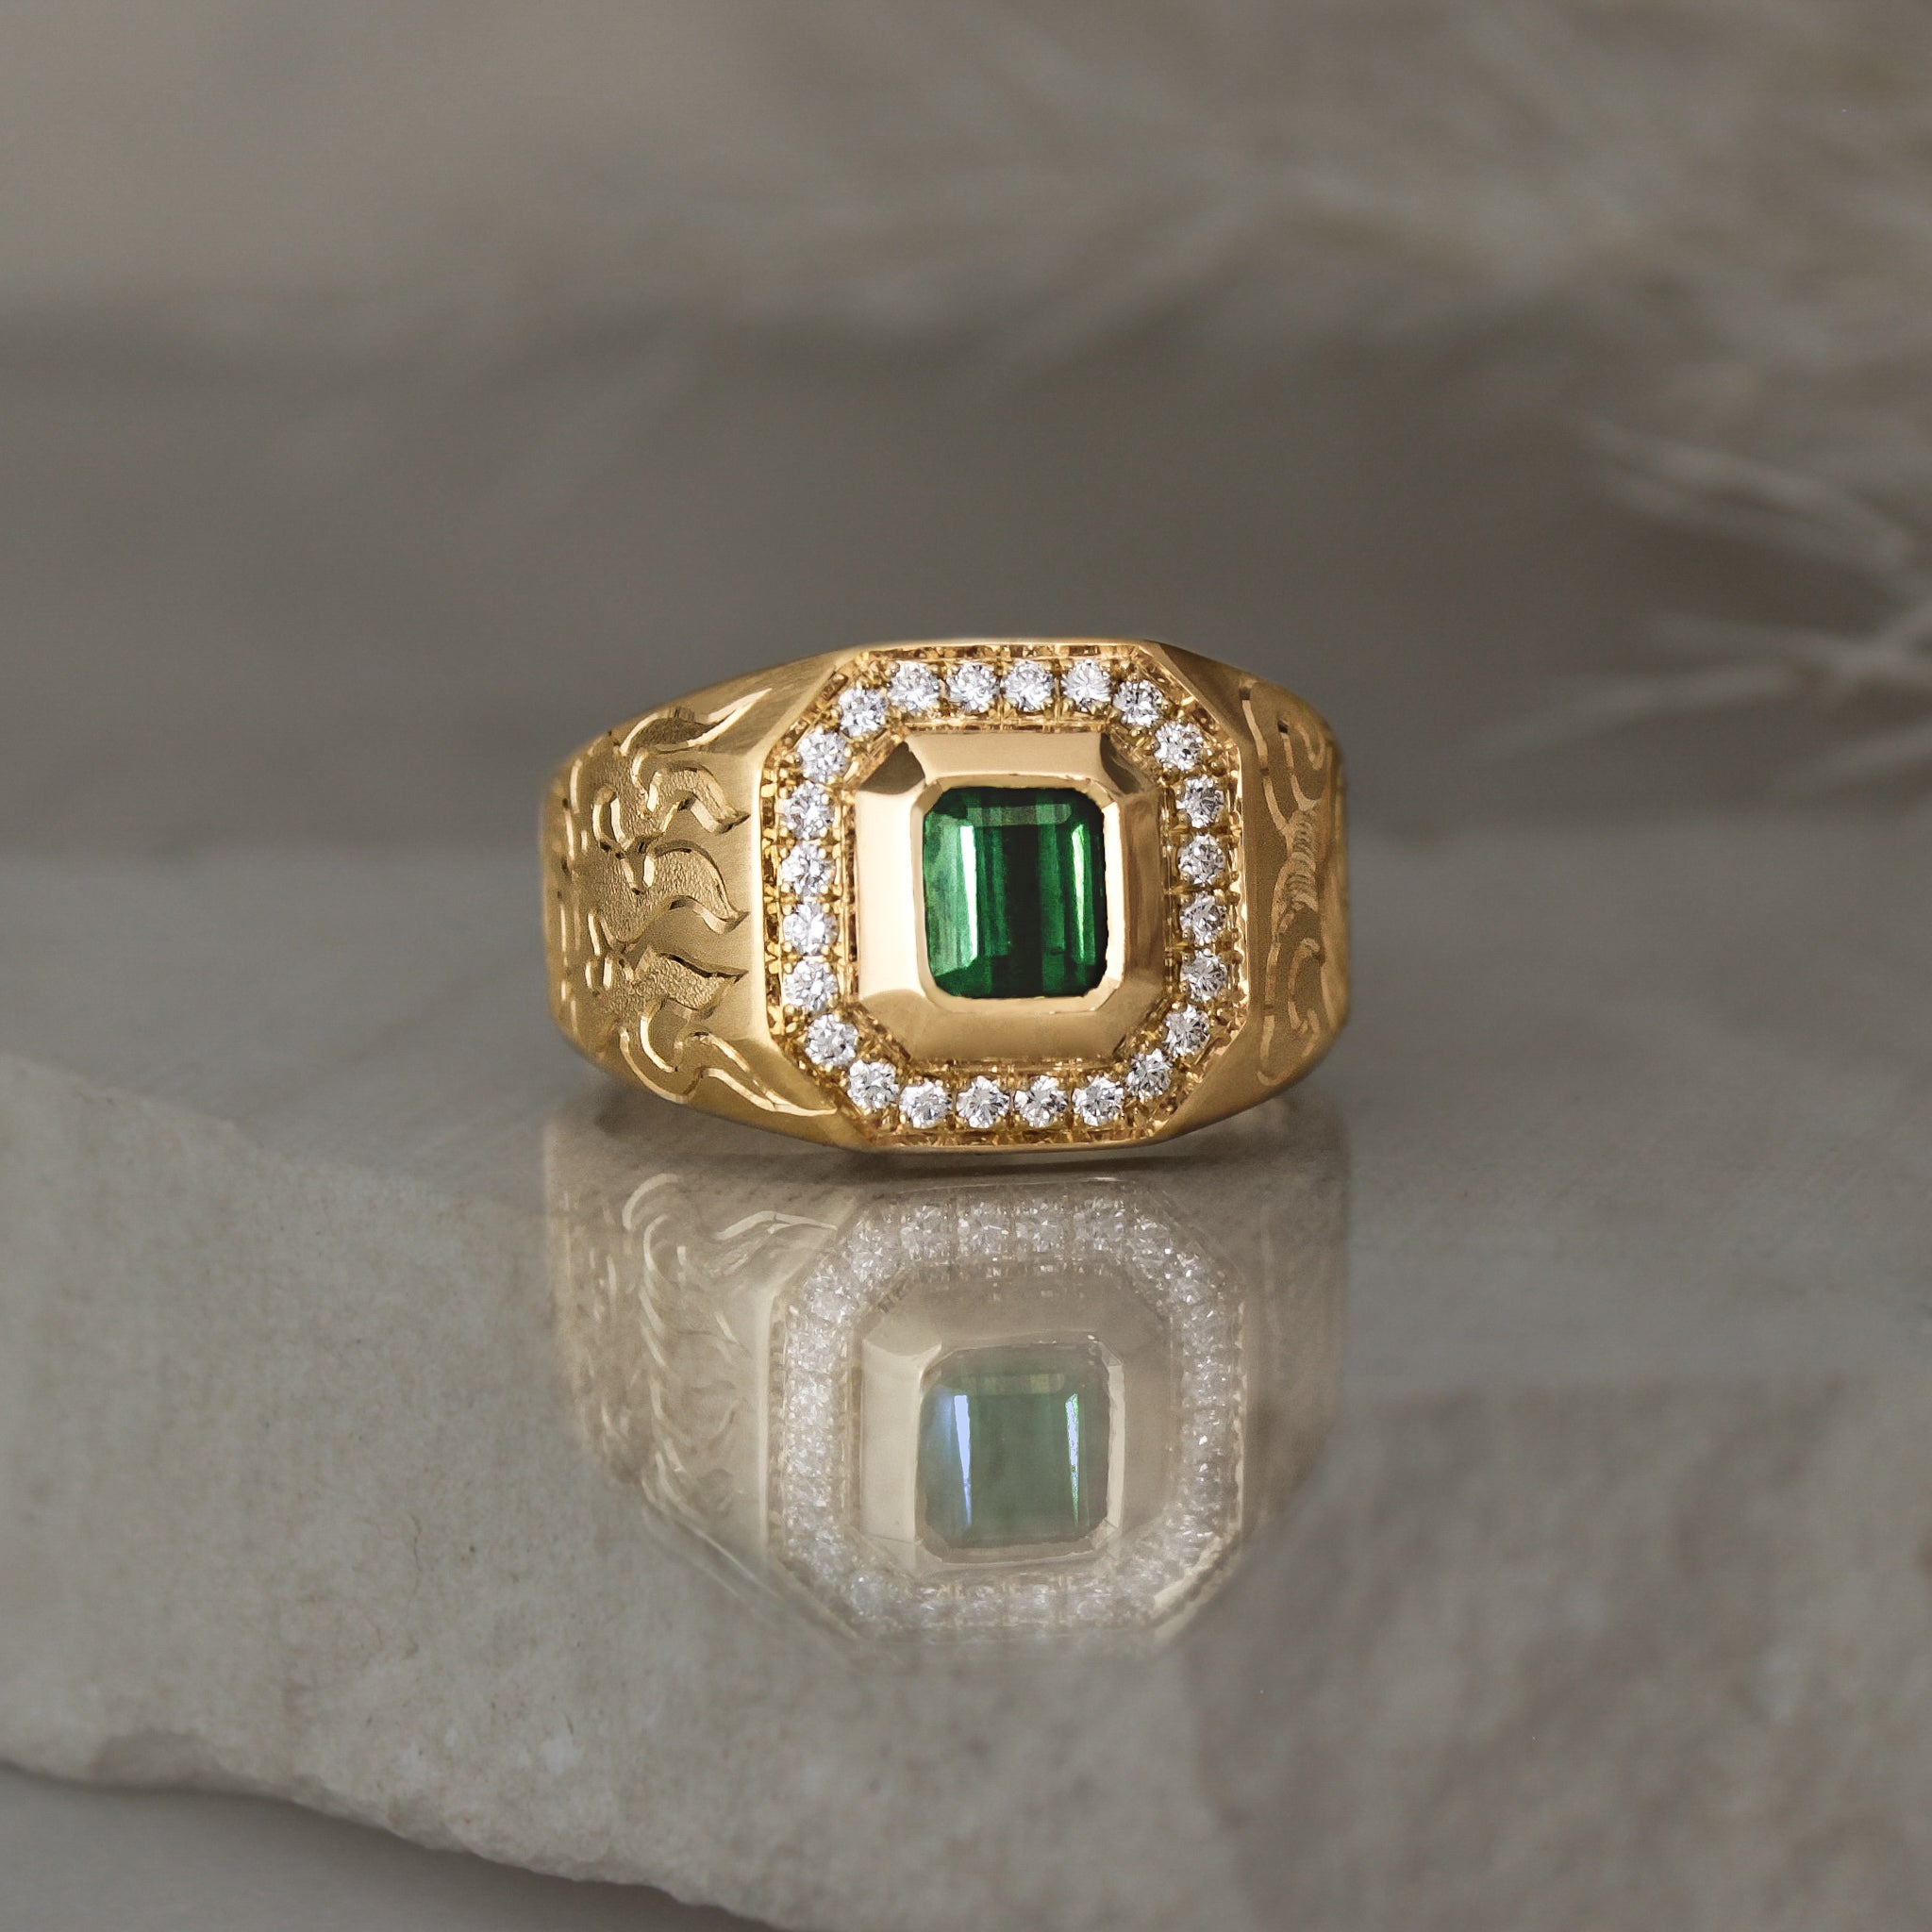 signet style 14k yellow gold ring with a green tourmaline square shape bezel set followed by a diamond halo with cut corners, engraved with waves on one side and fire on the other side.